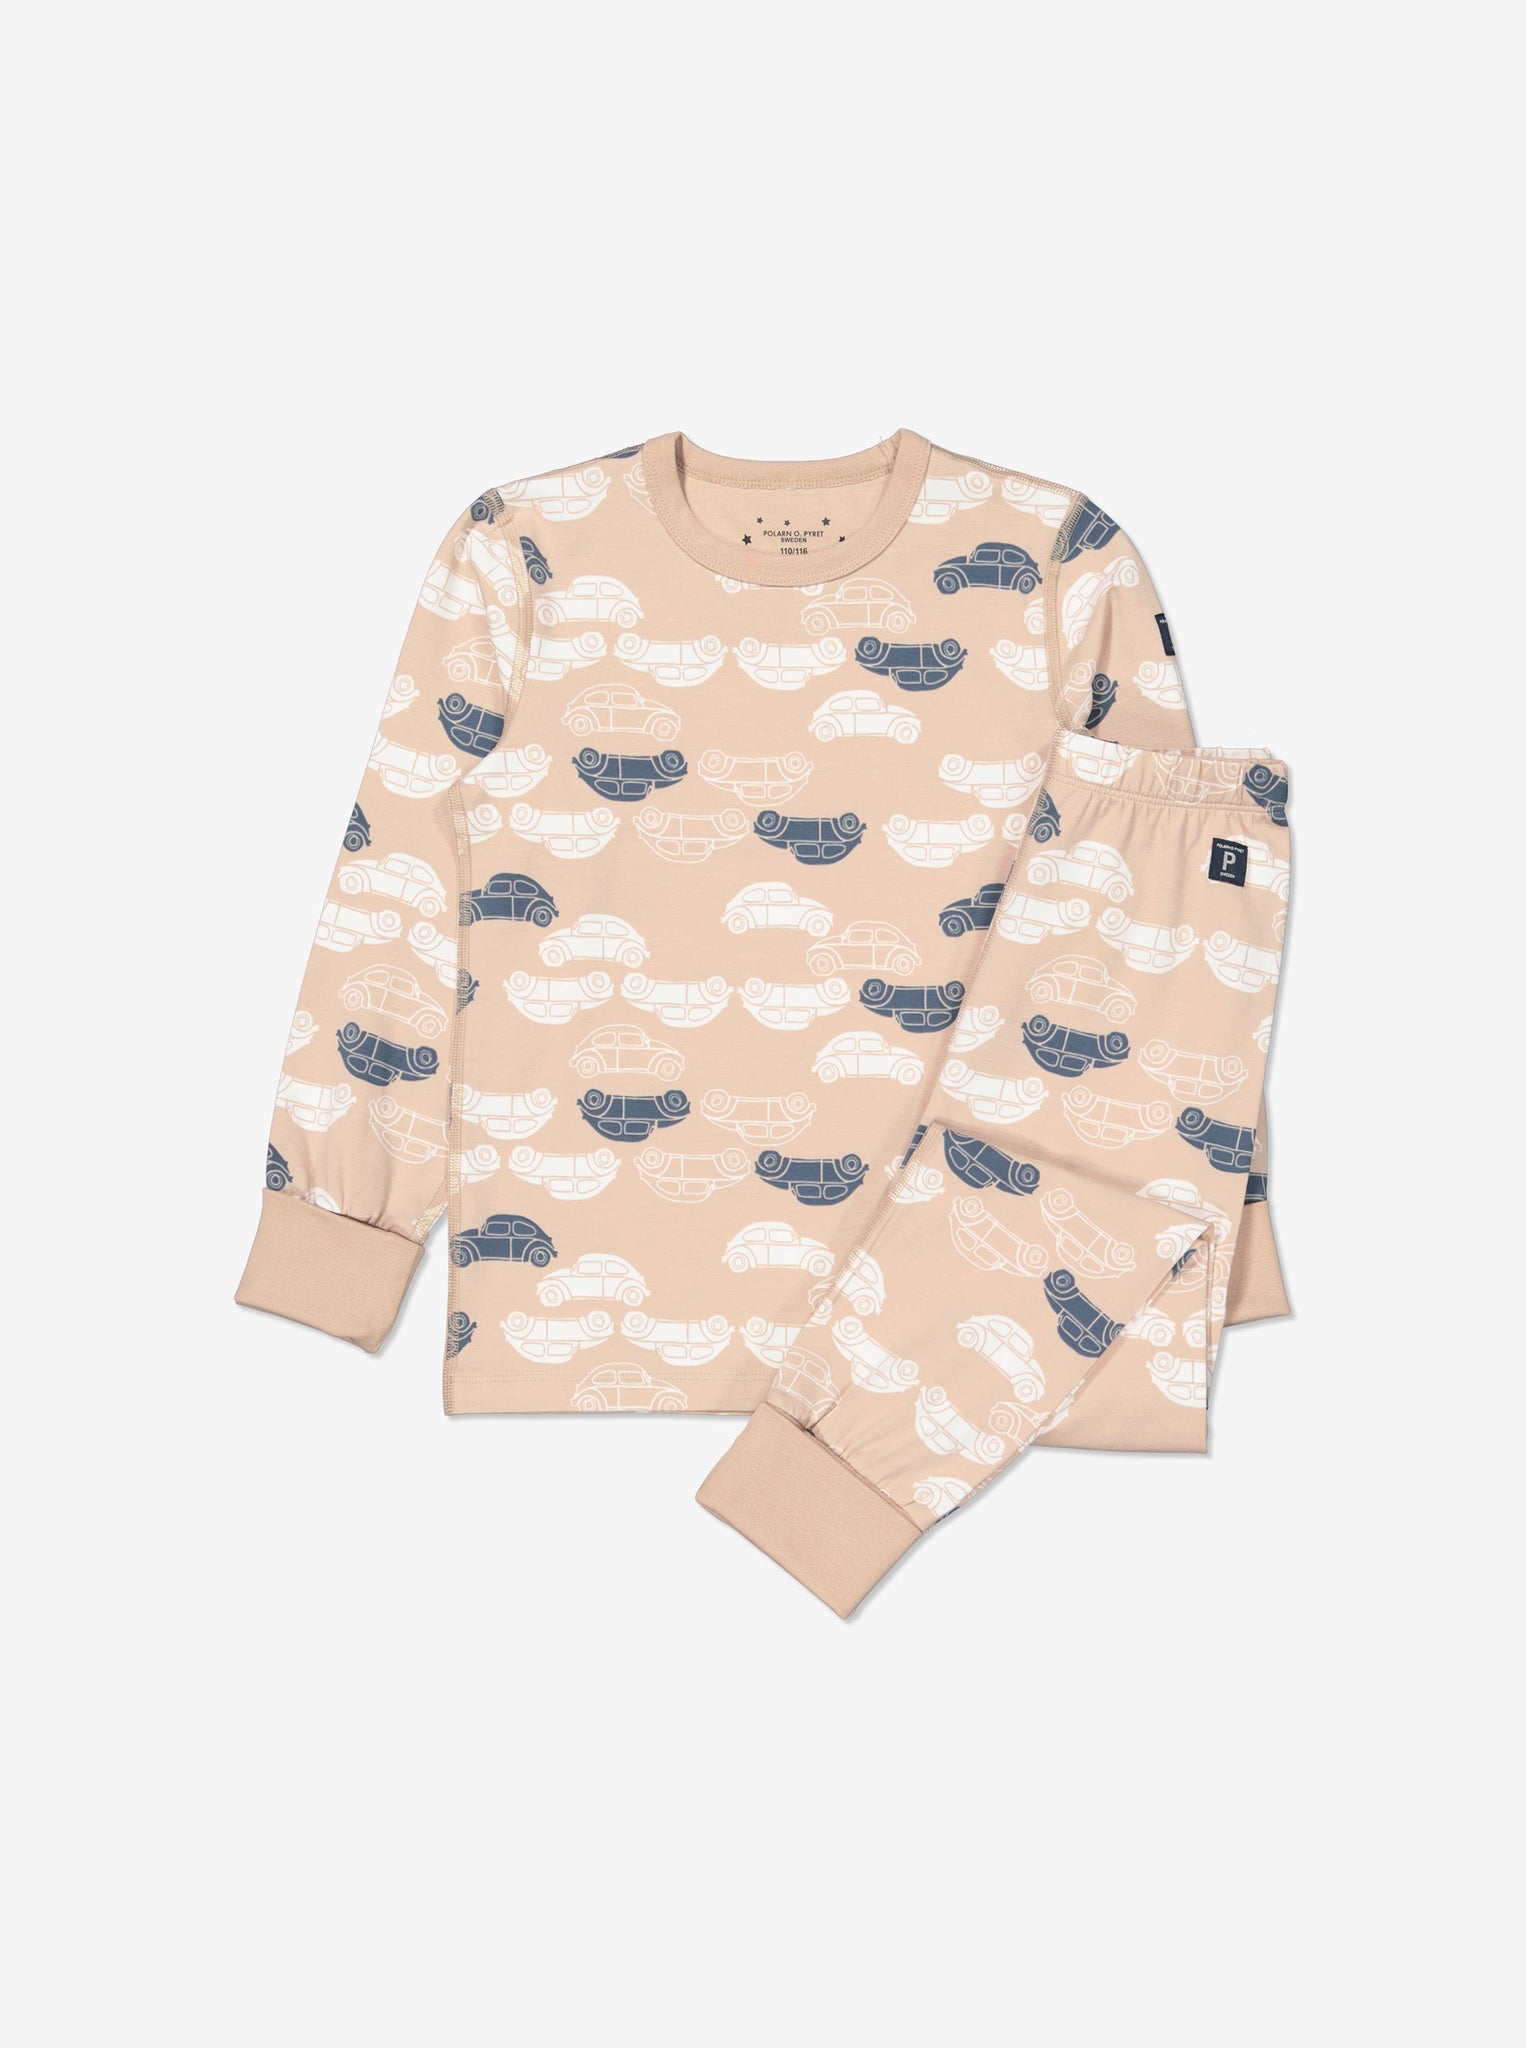  Organic Cotton Car Print Kids Pyjamas from Polarn O. Pyret Kidswear. Made from sustainable materials.